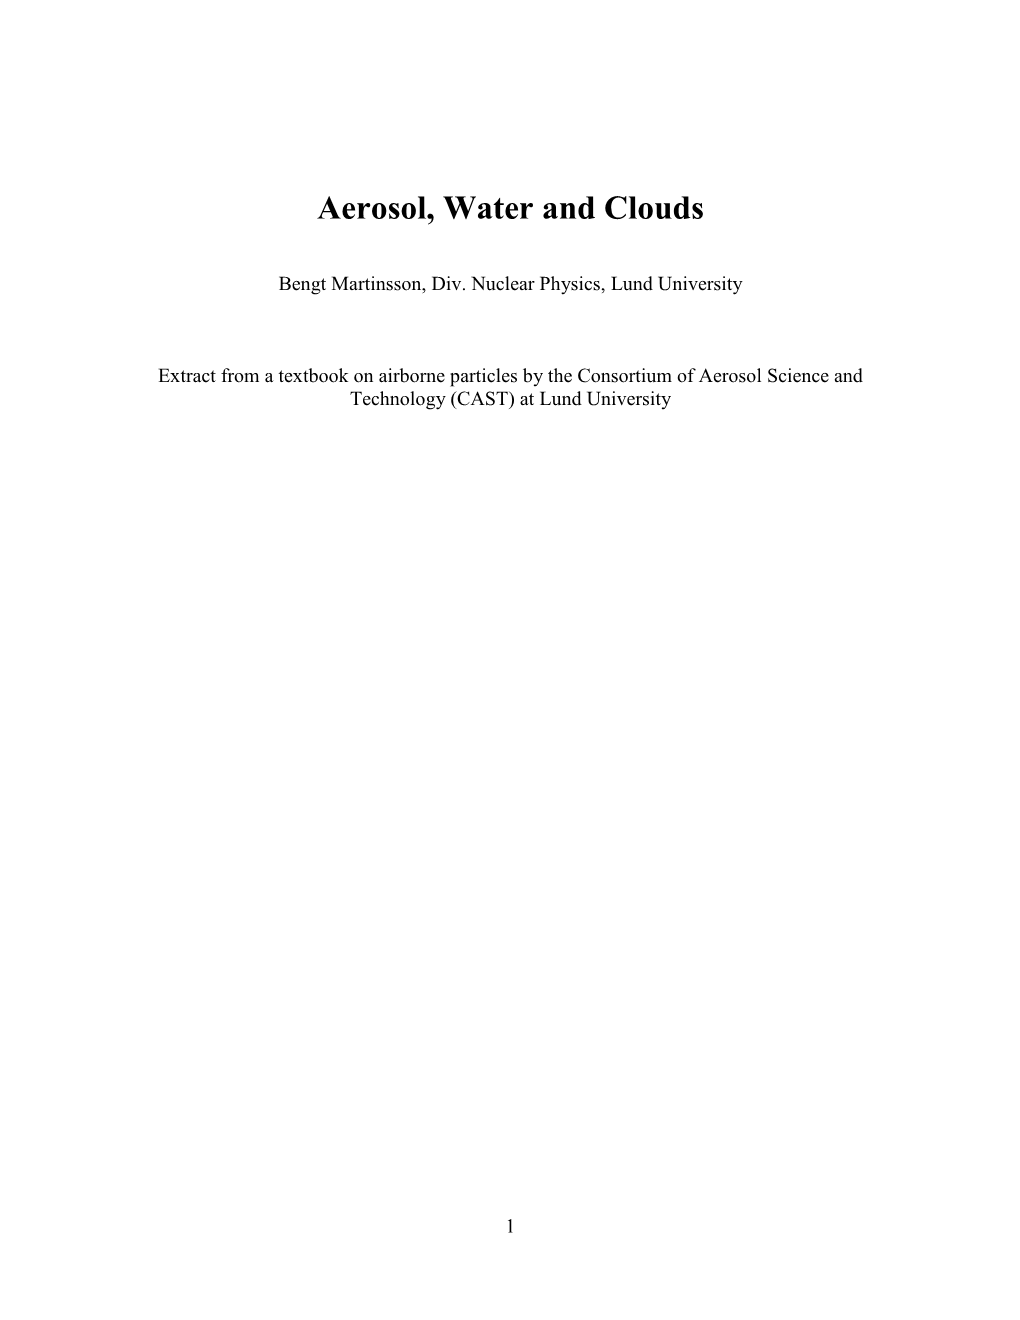 Aerosol, Water and Clouds